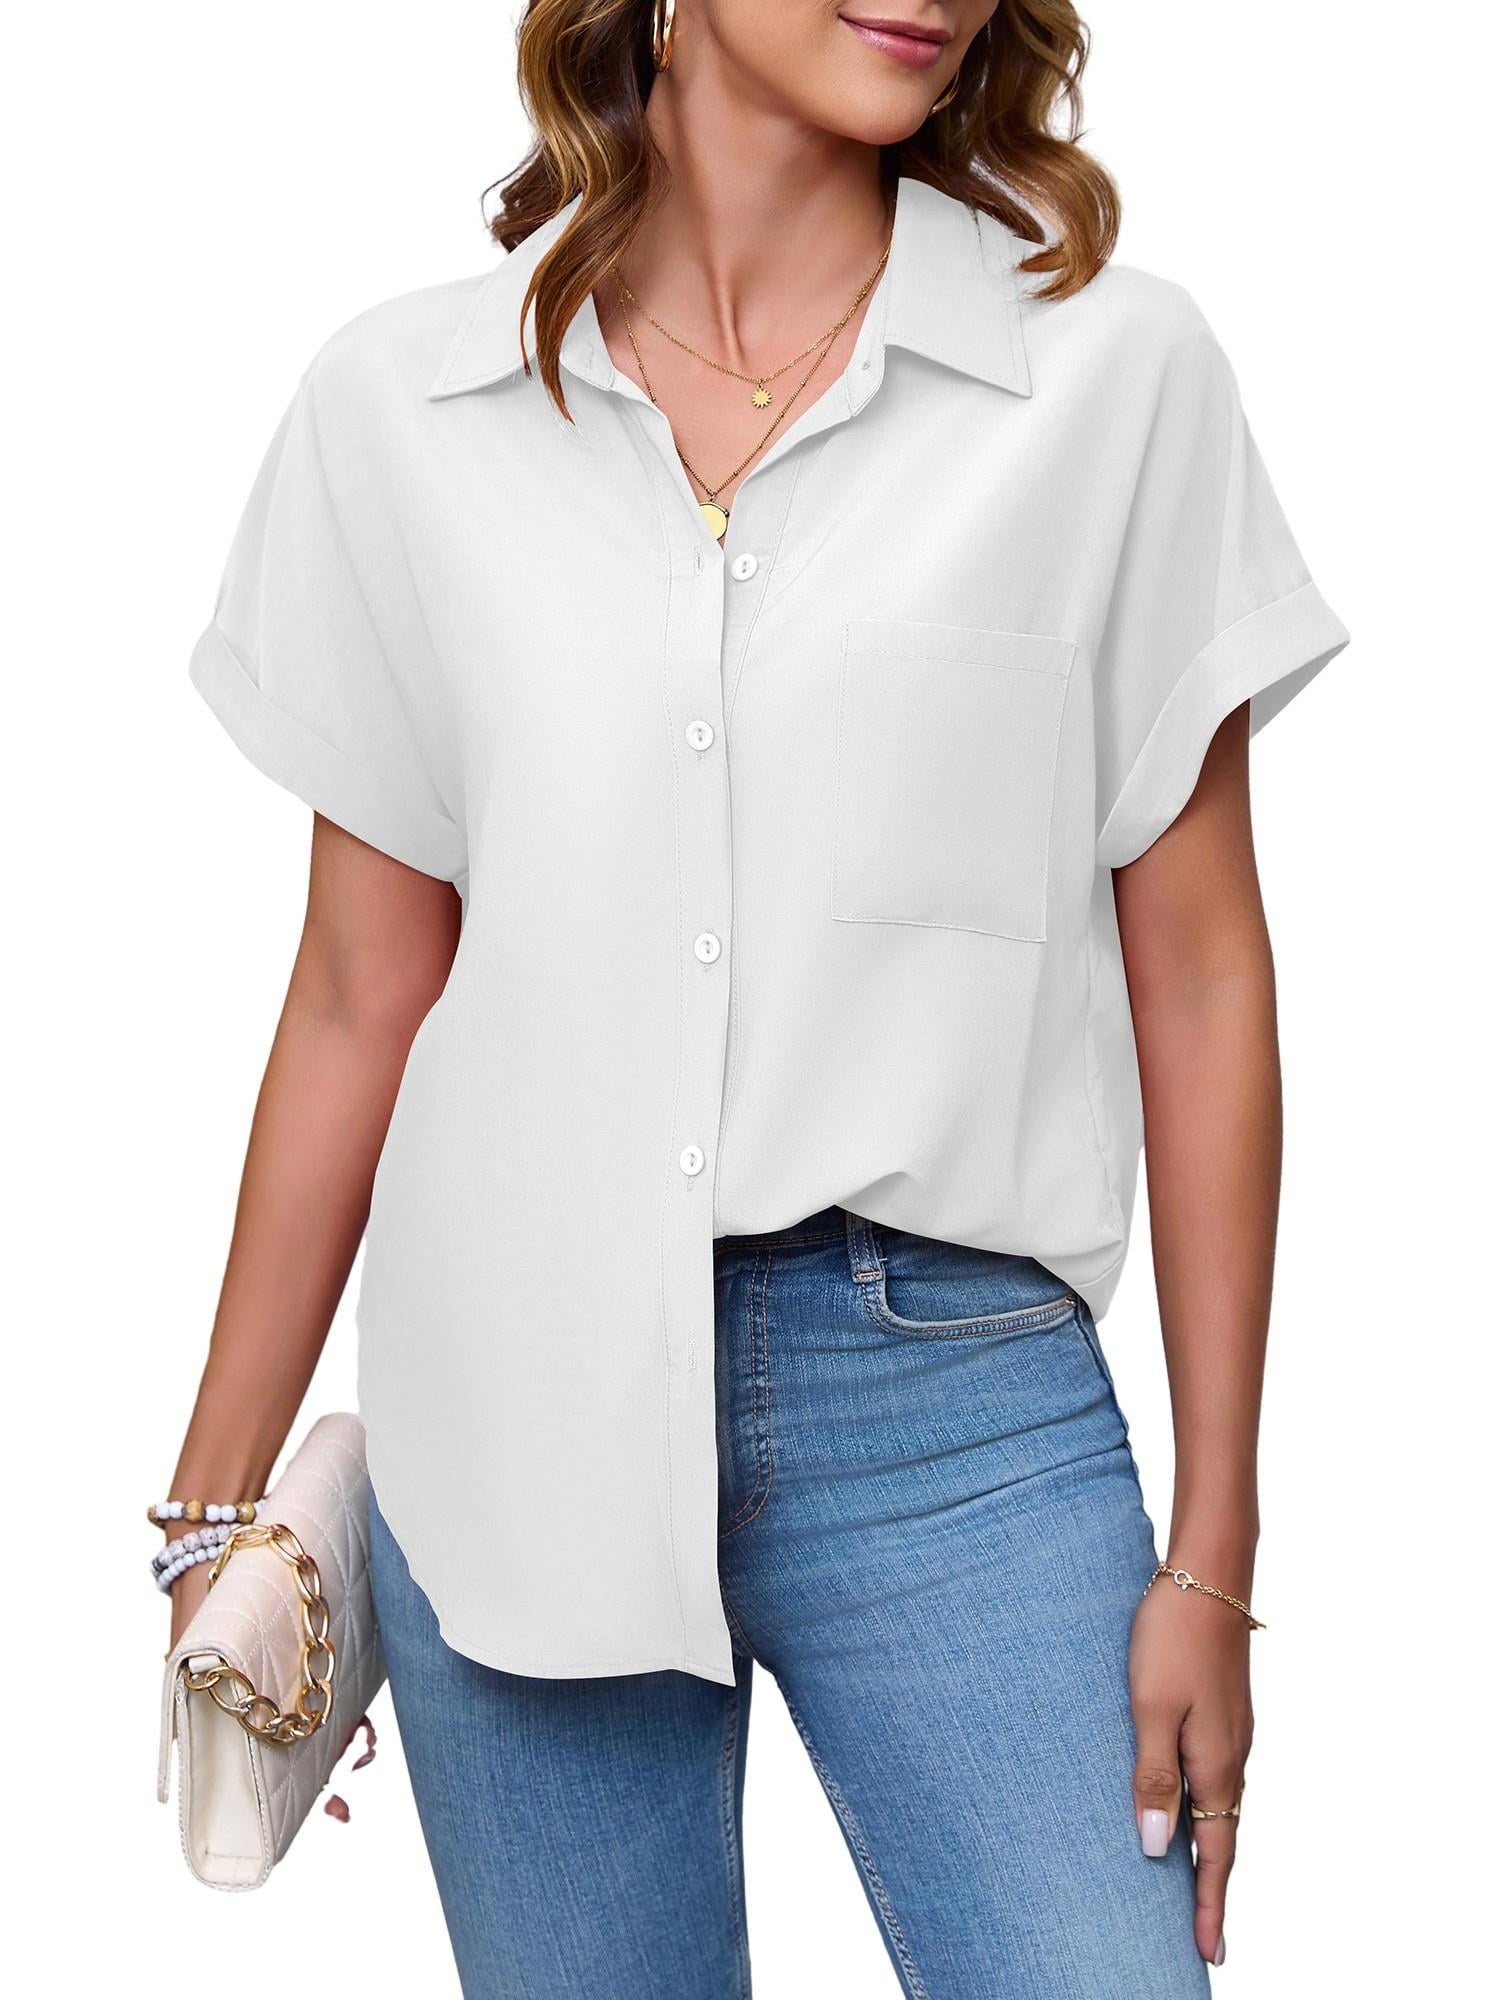 HOWCOME Button Down Blouses for Women Short Sleeve Office Casual Blouse ...